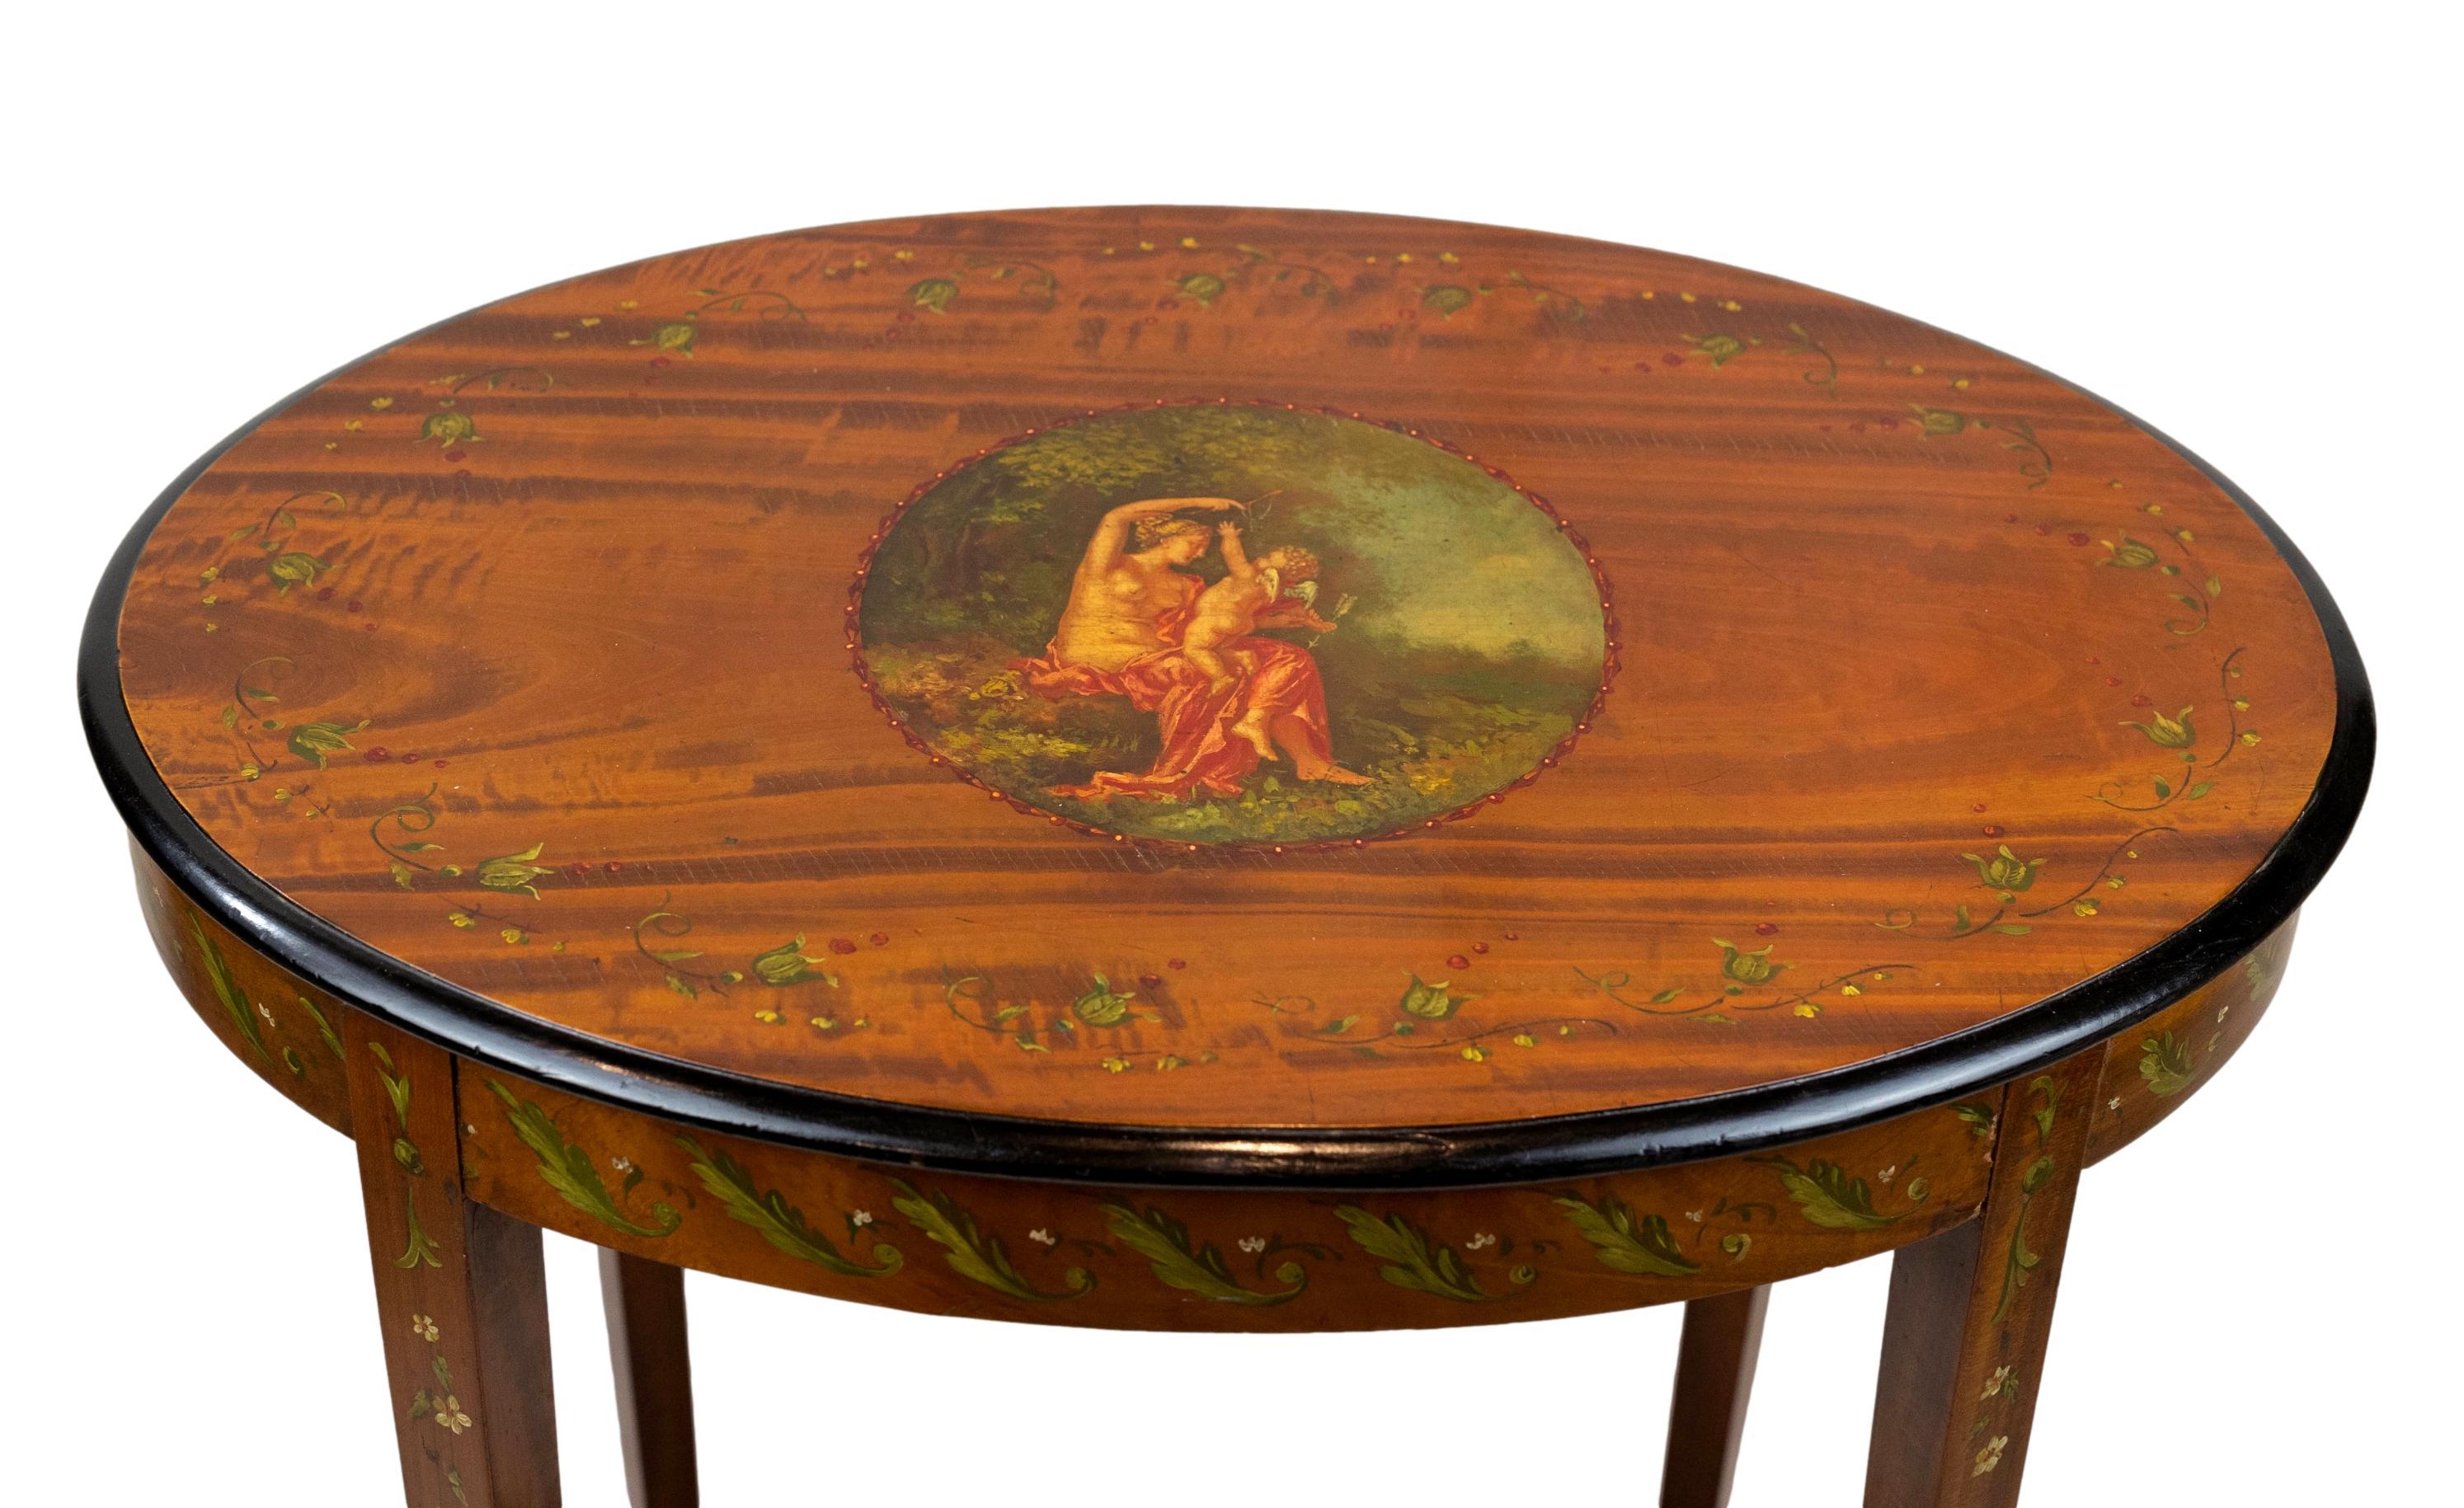 Edwardian Painted Satinwood Two-Tier Occasional Table, English, ca. 1900 For Sale 2